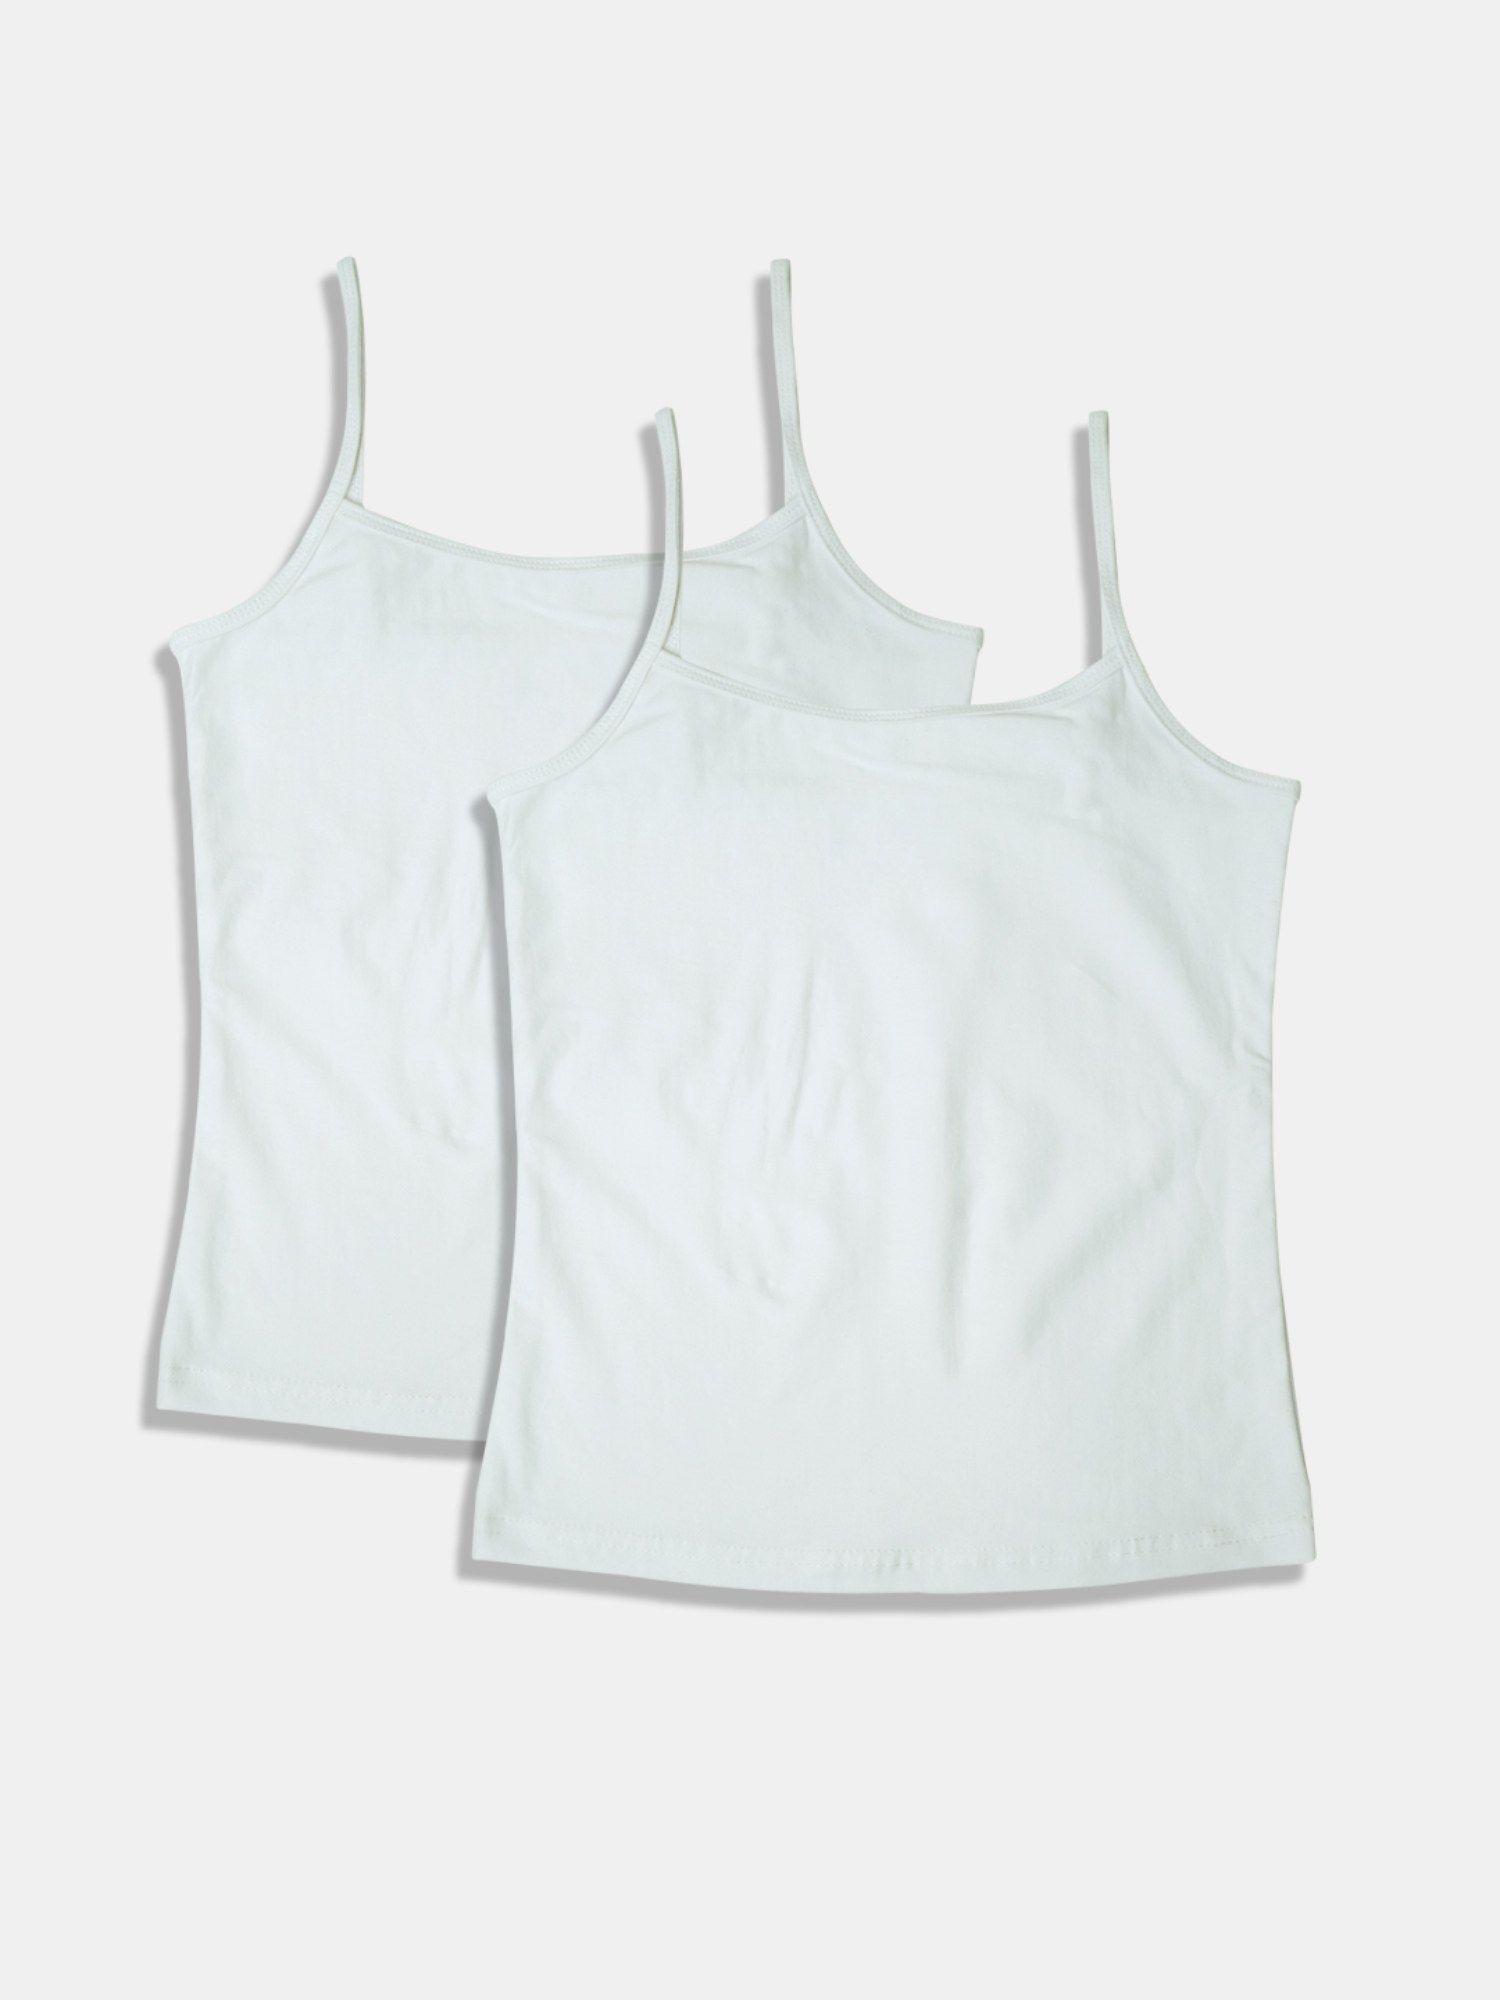 girls white camisoles (pack of 2)